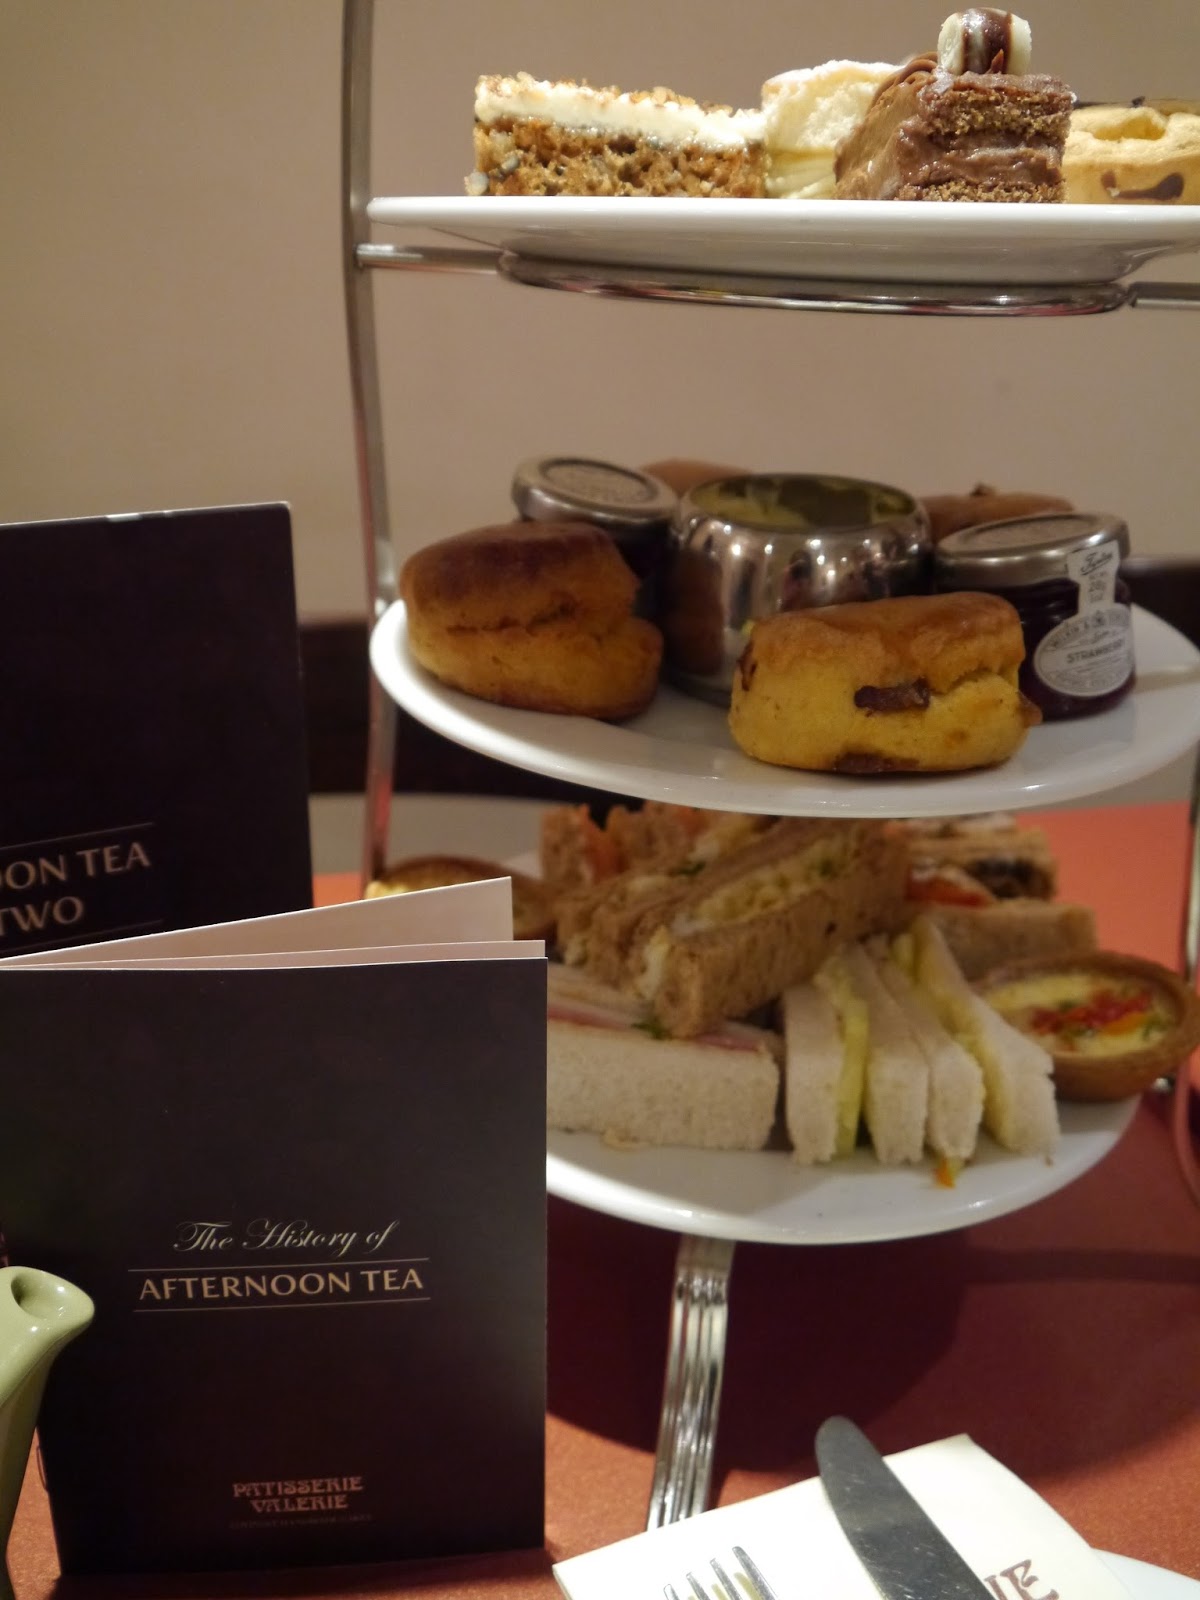 EVENT: Afternoon tea with Patisserie Valerie